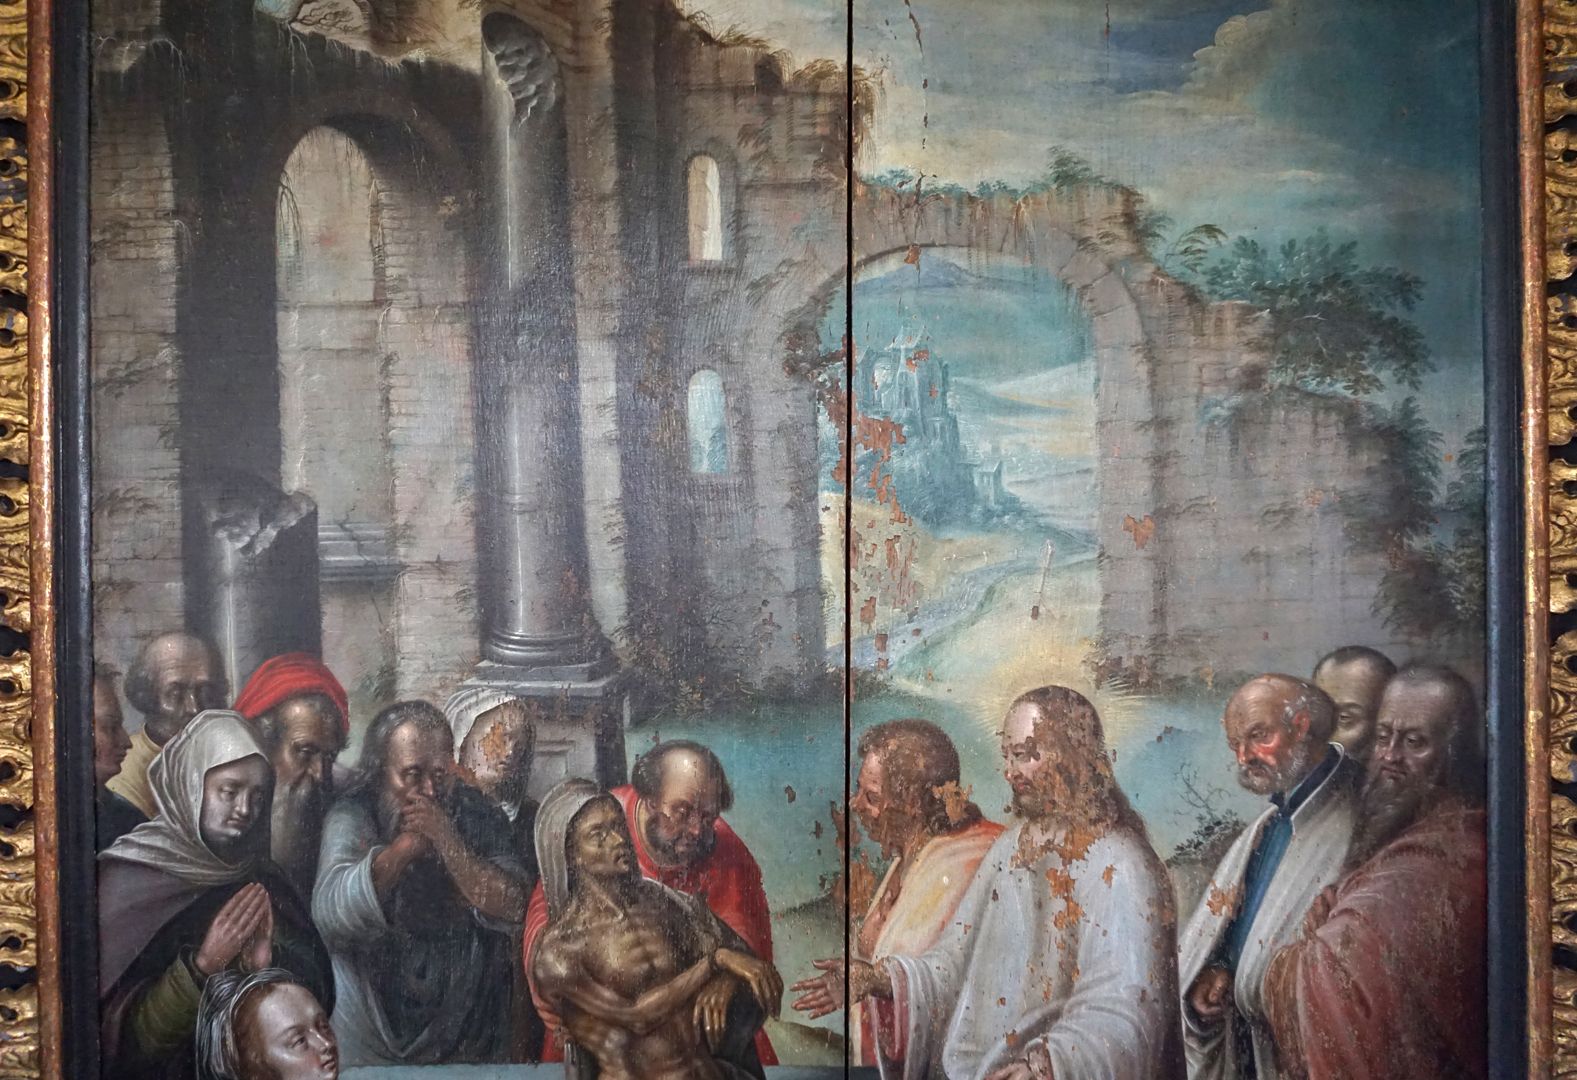 Painting epitaph for Sigmund Herel Middle picture with the raising of Lazarus, detailed view with ruins and those present